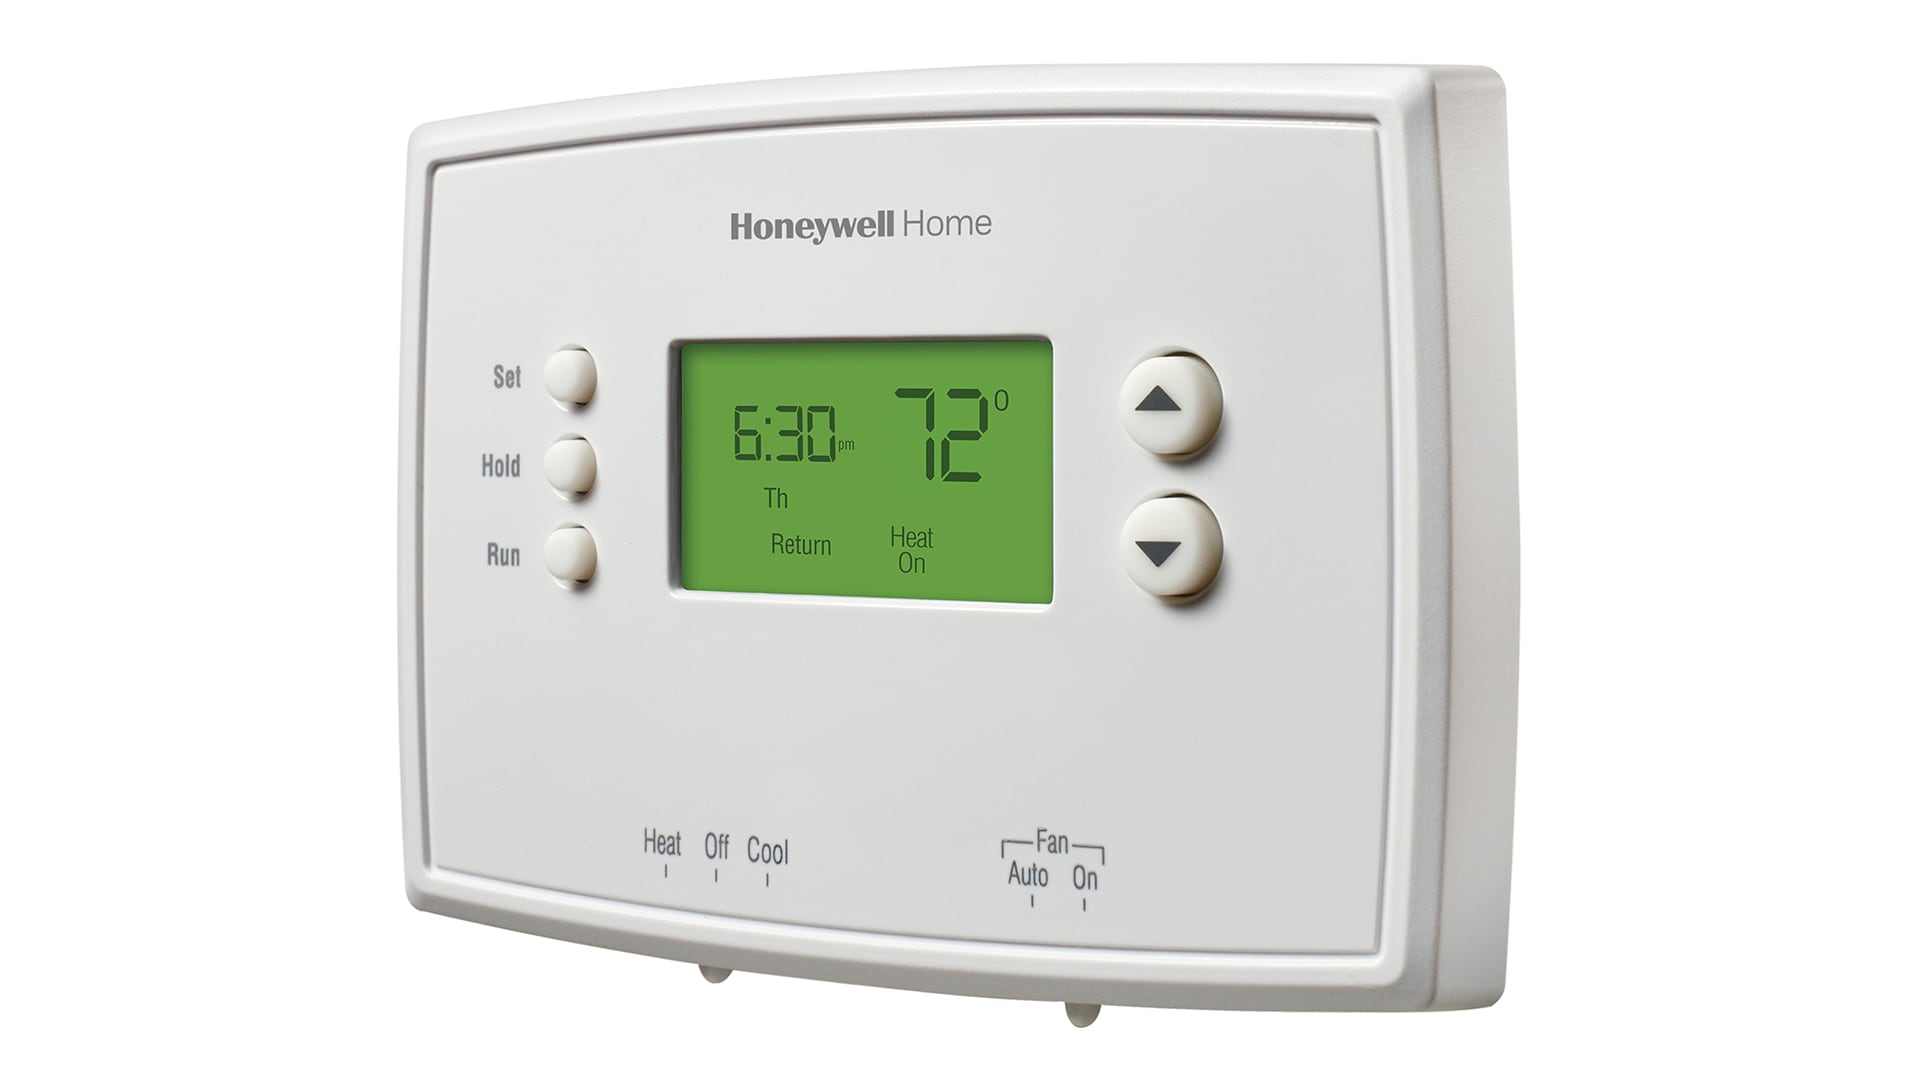 Honeywell Home RTH2300B 24-Volt 5-2 Day Programmable Thermostat in